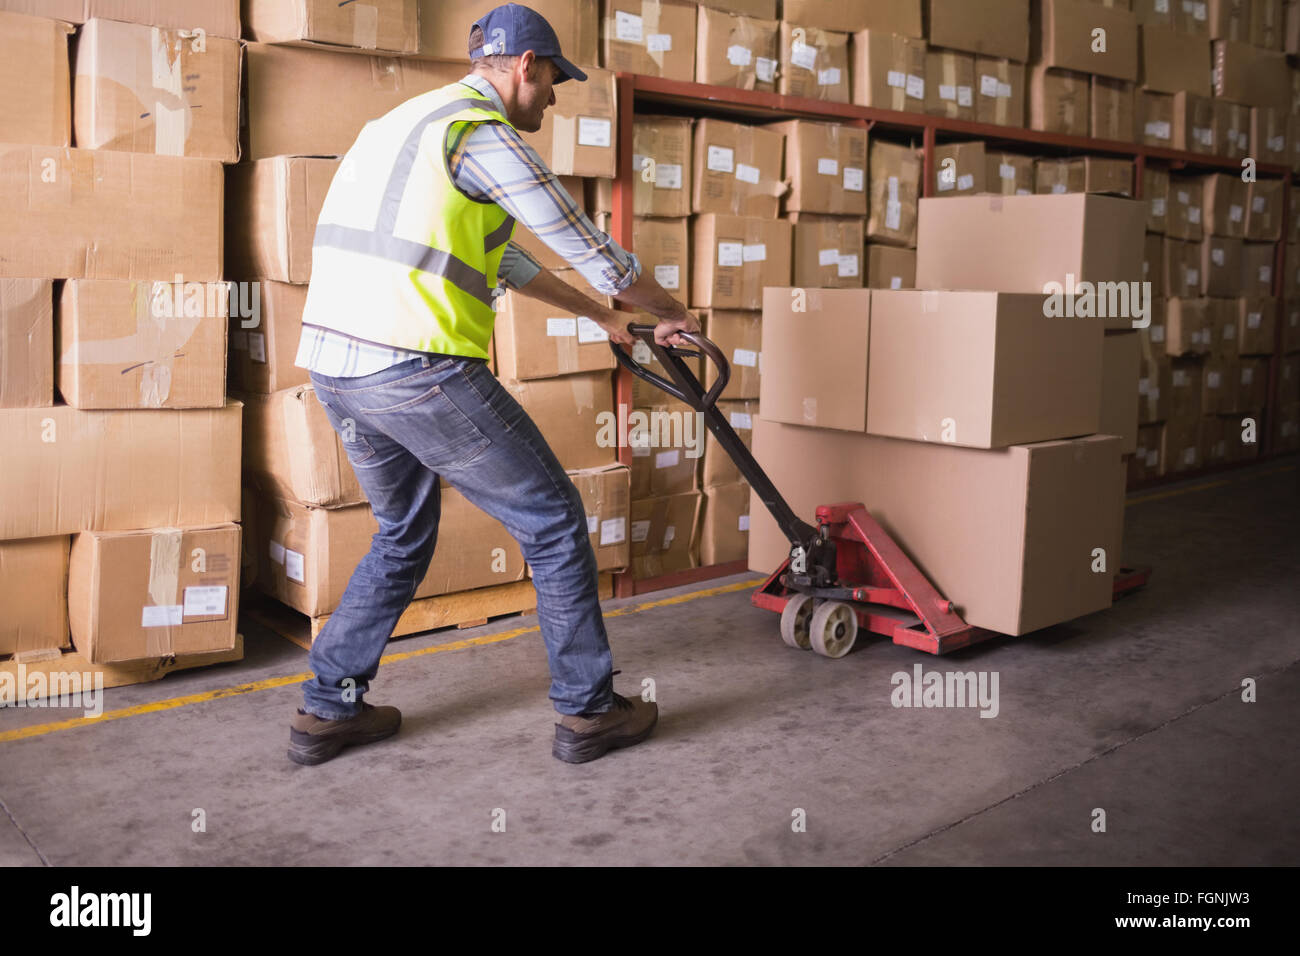 Worker pushing trolley with boxes in warehouse Stock Photo